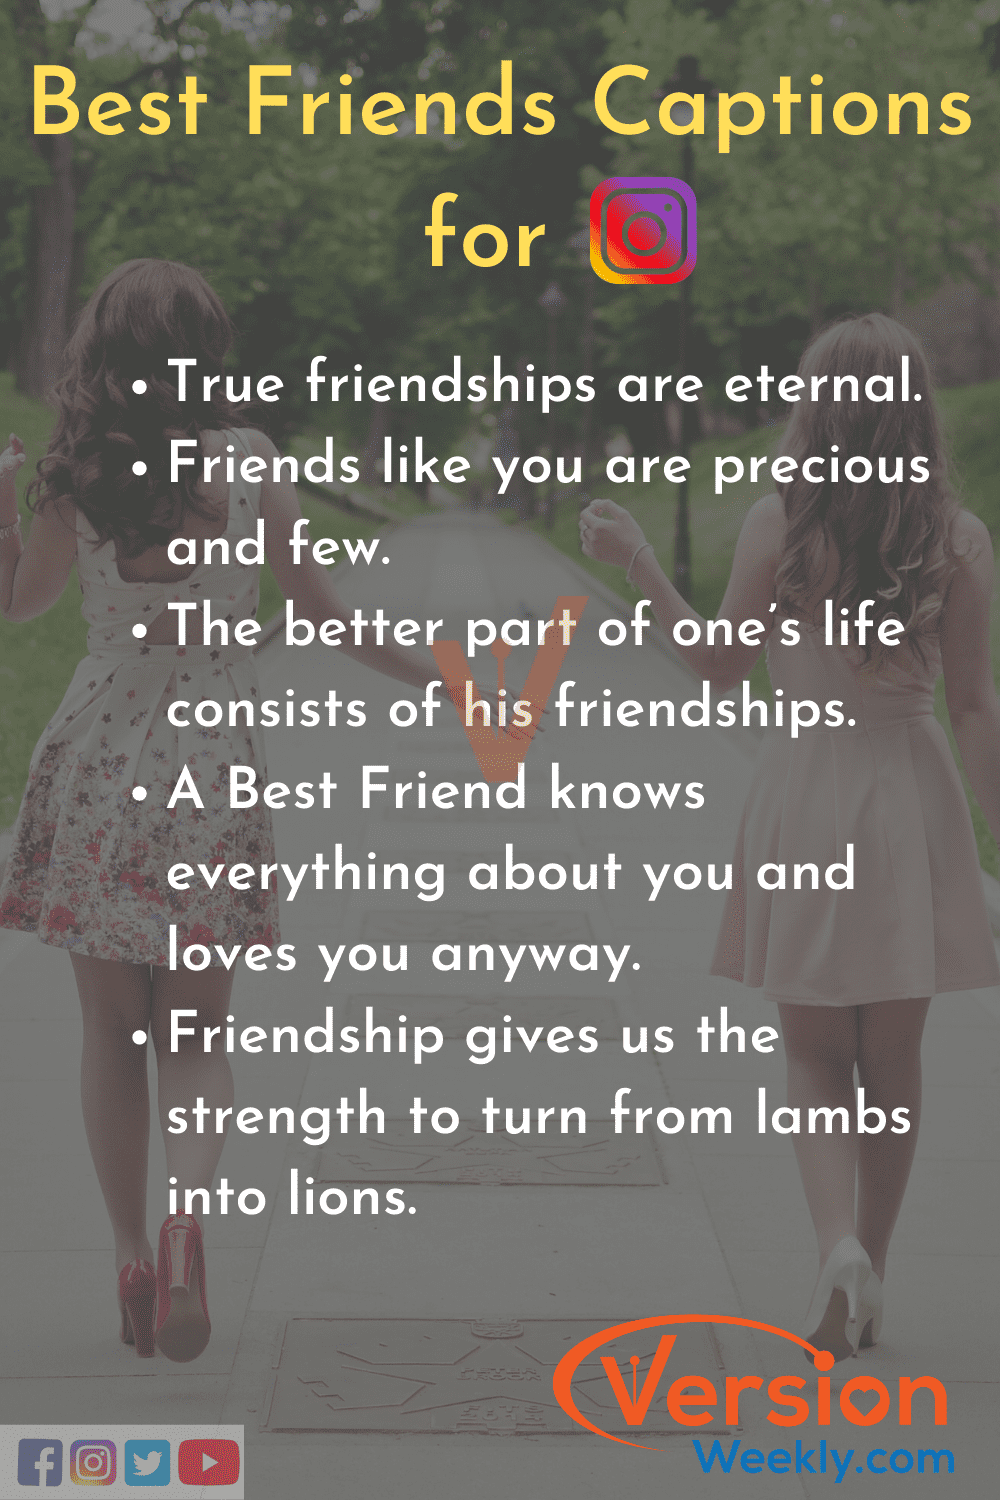 Best Friends Quotes for Instagram